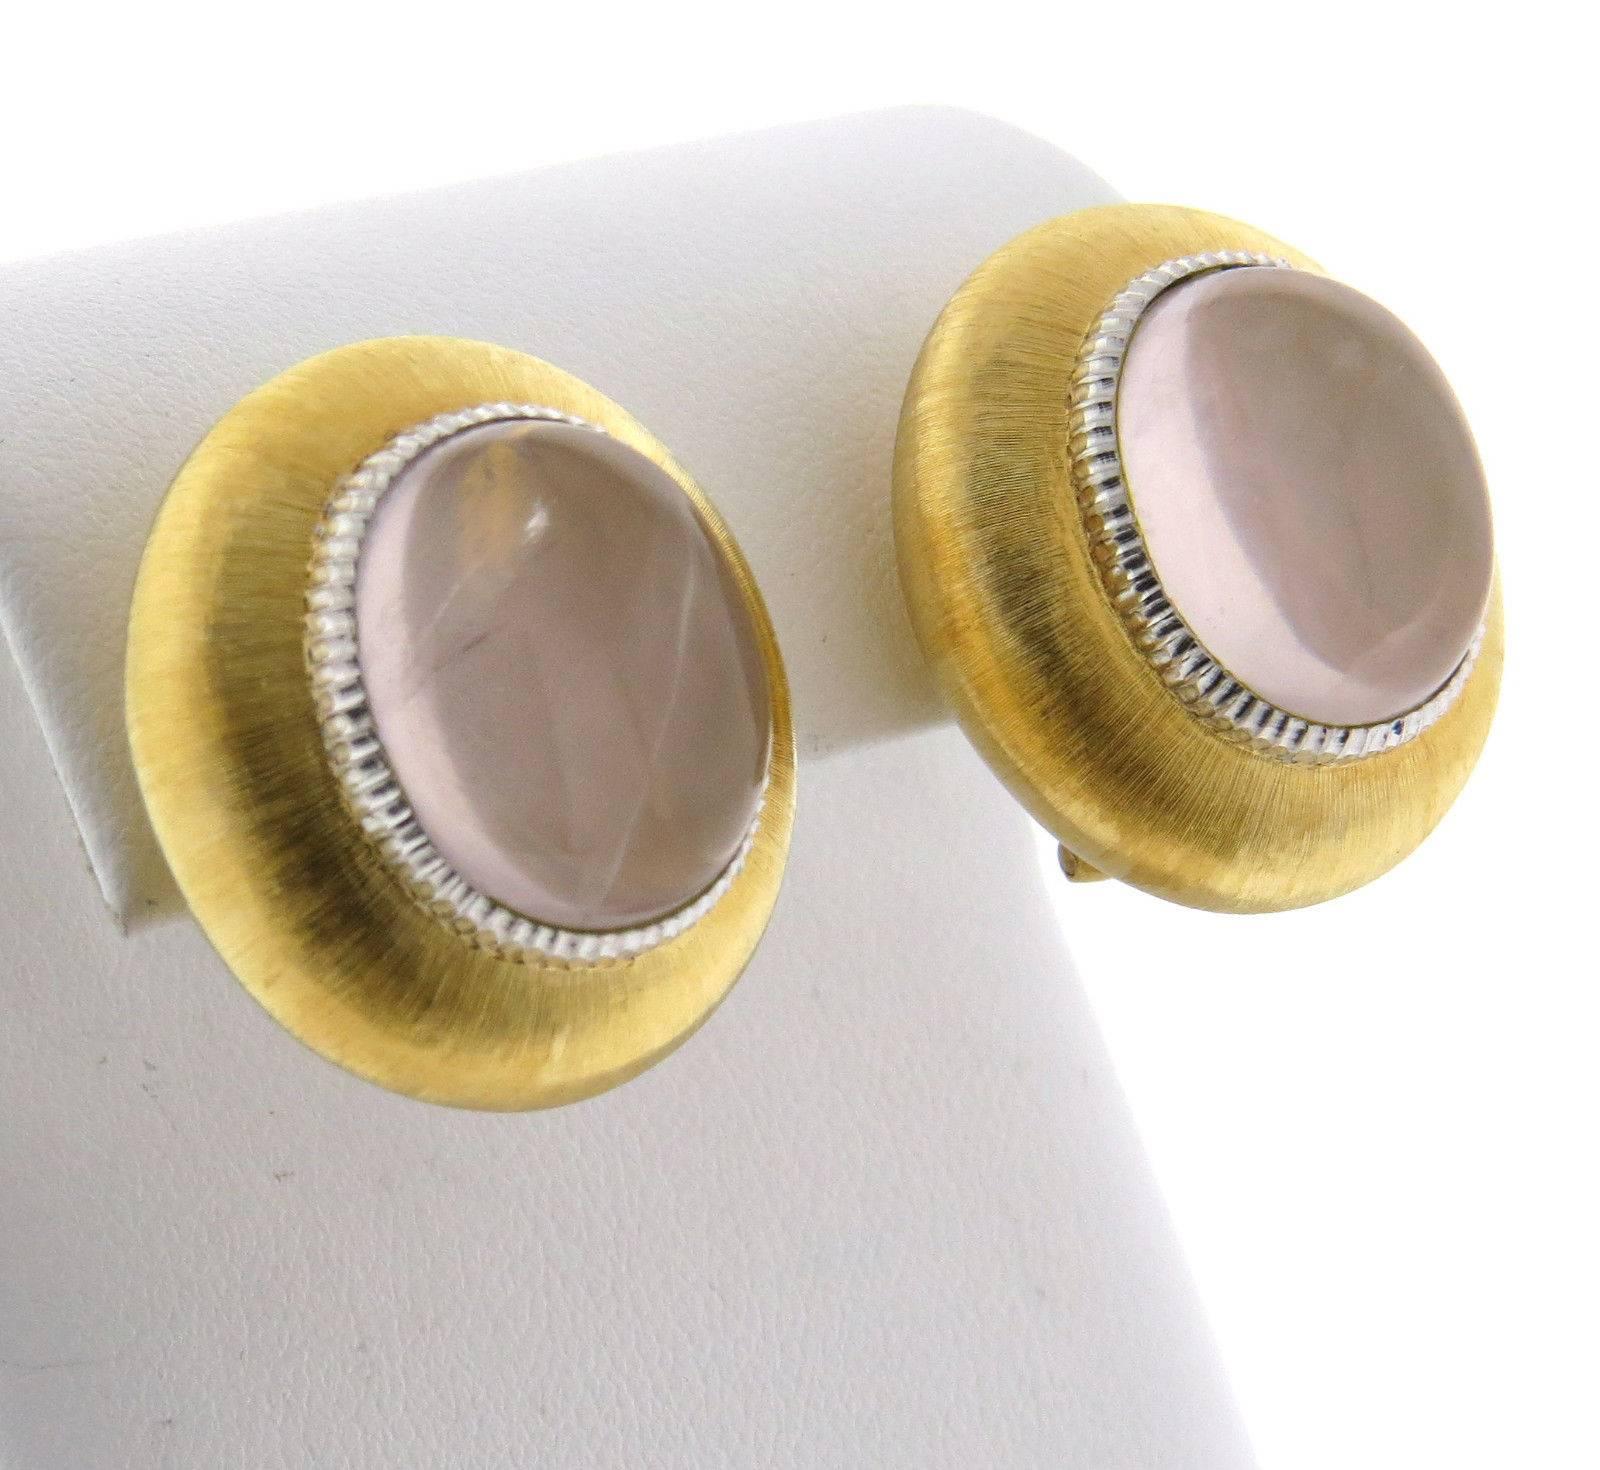 A pair of 18k yellow and white gold earrings set with rose quartz cabochons measuring 16.7mm x 14mm.  Crafted by Buccellati, the earrings measure 25mm x 22mm and weigh 24.9 grams.  Marked: Buccellati, Italy 18k. Come with original Buccellati